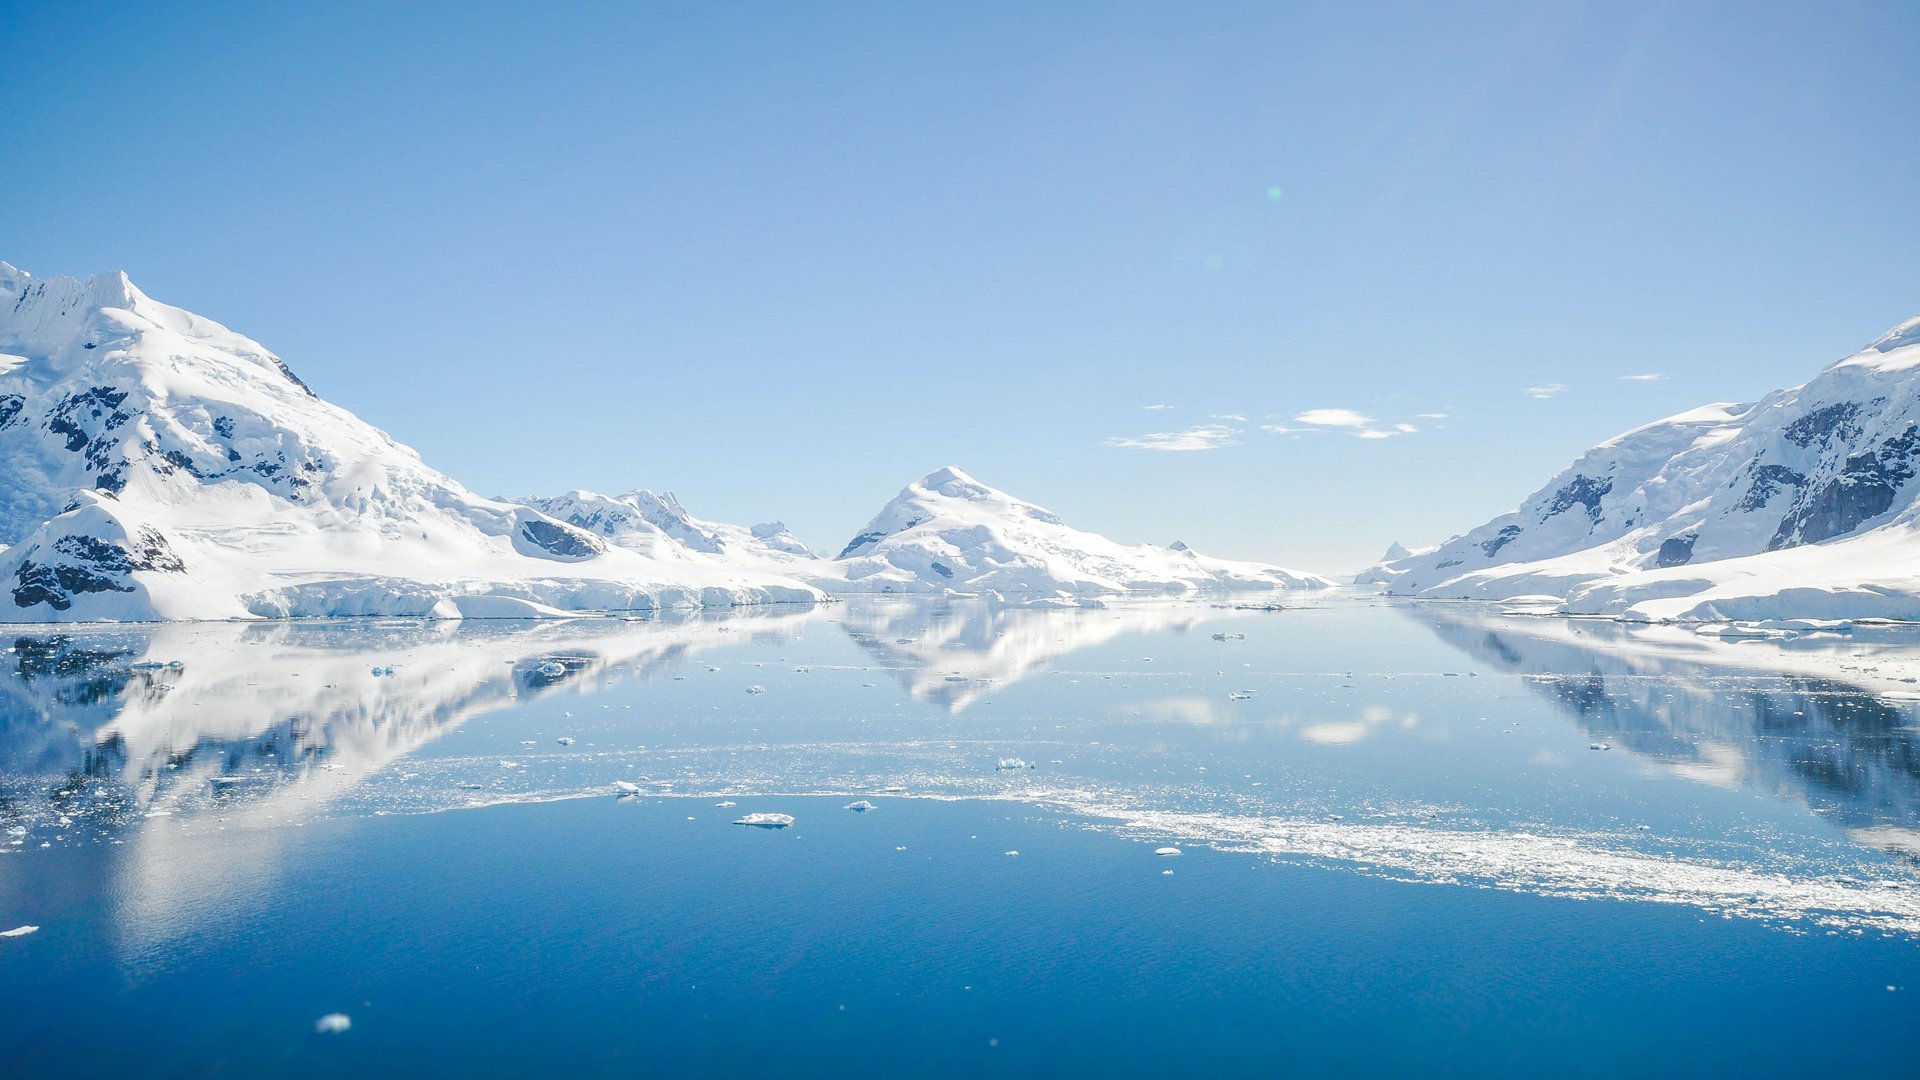 stark and beautiful landscape awaits on your trip to Antarctica